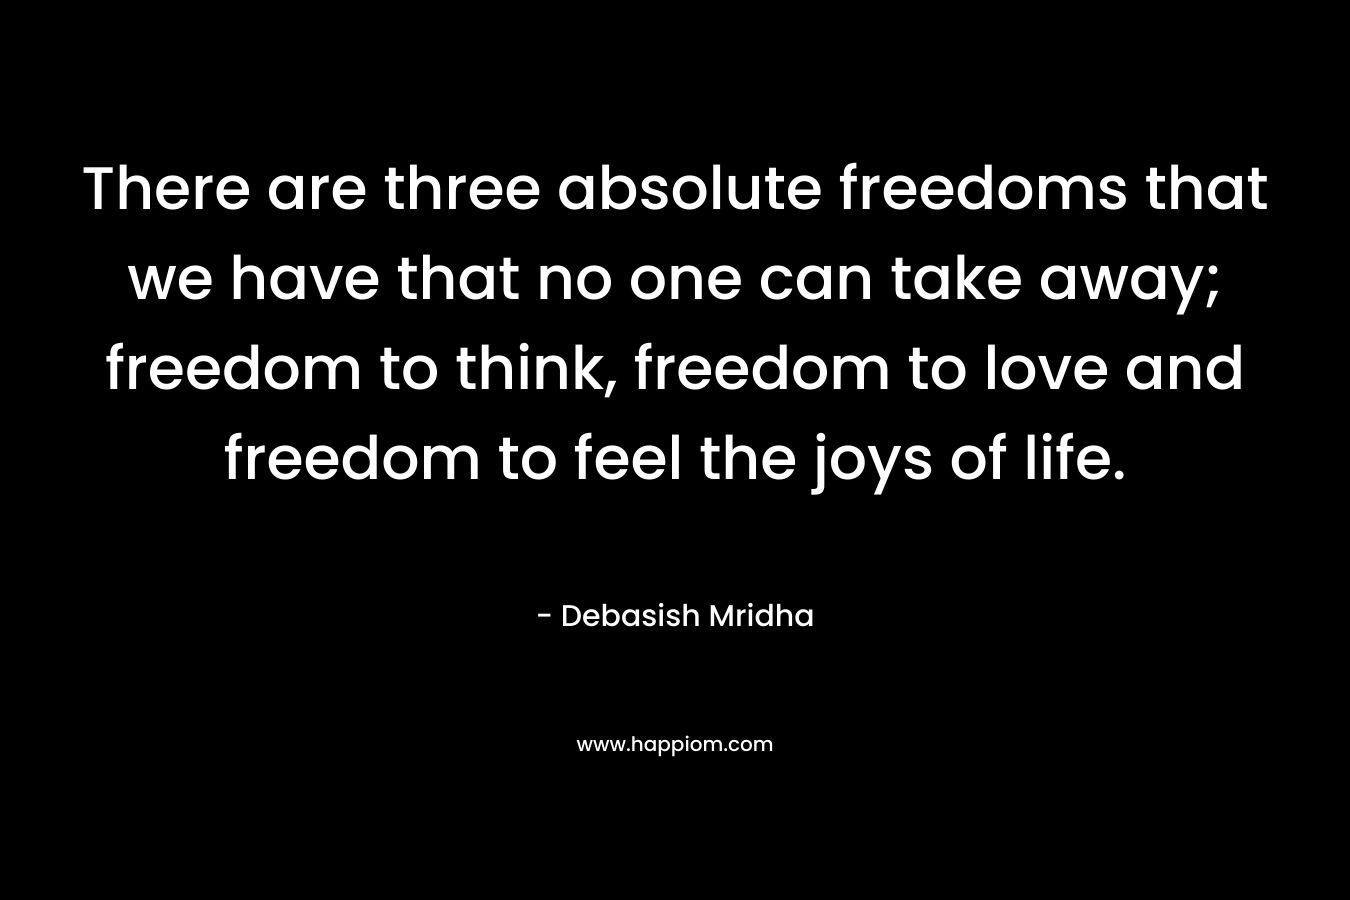 There are three absolute freedoms that we have that no one can take away; freedom to think, freedom to love and freedom to feel the joys of life. – Debasish Mridha